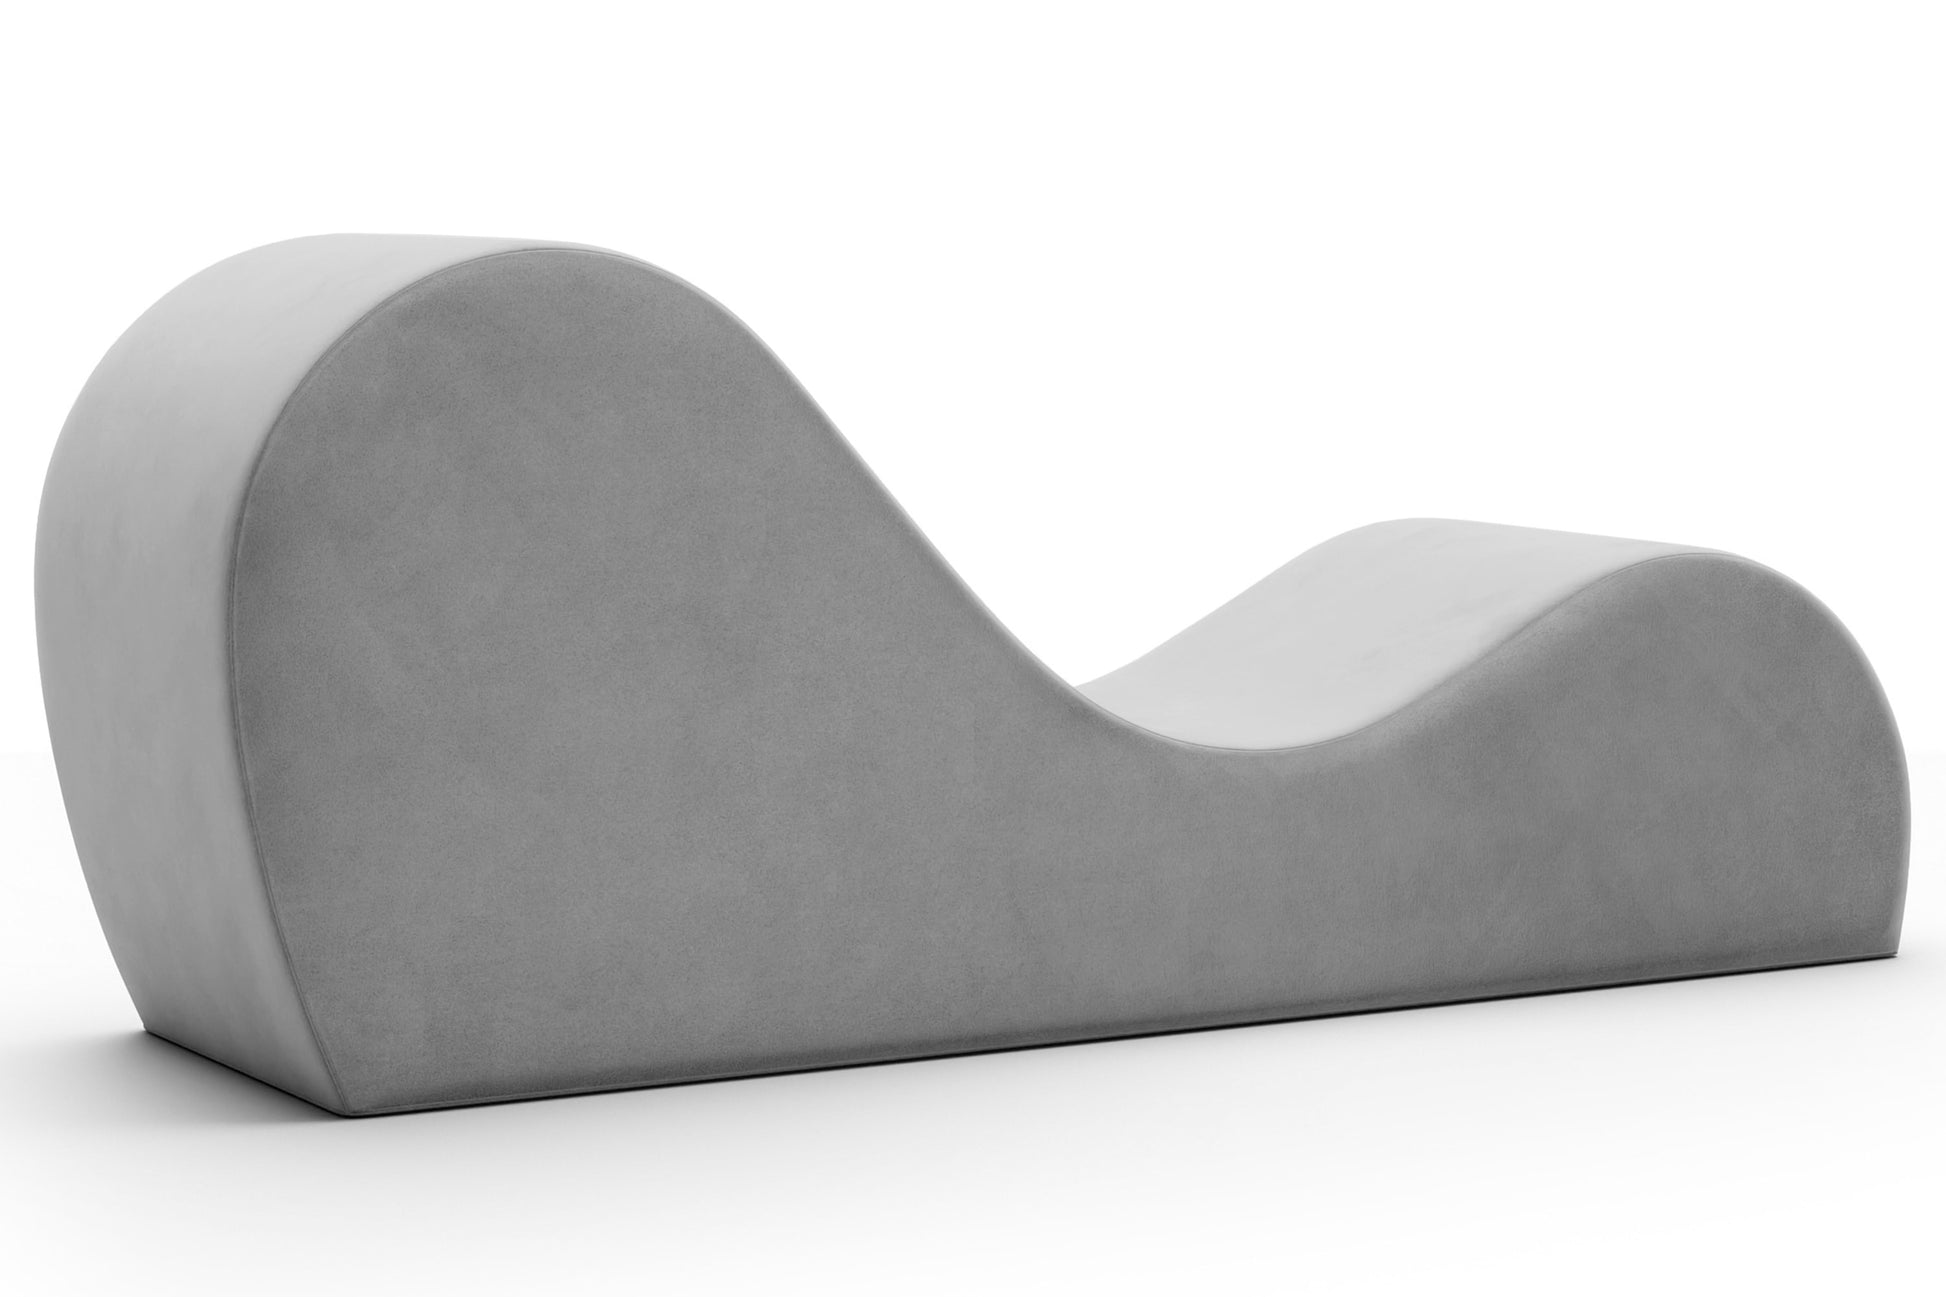 The Cello Chaise by Liberator